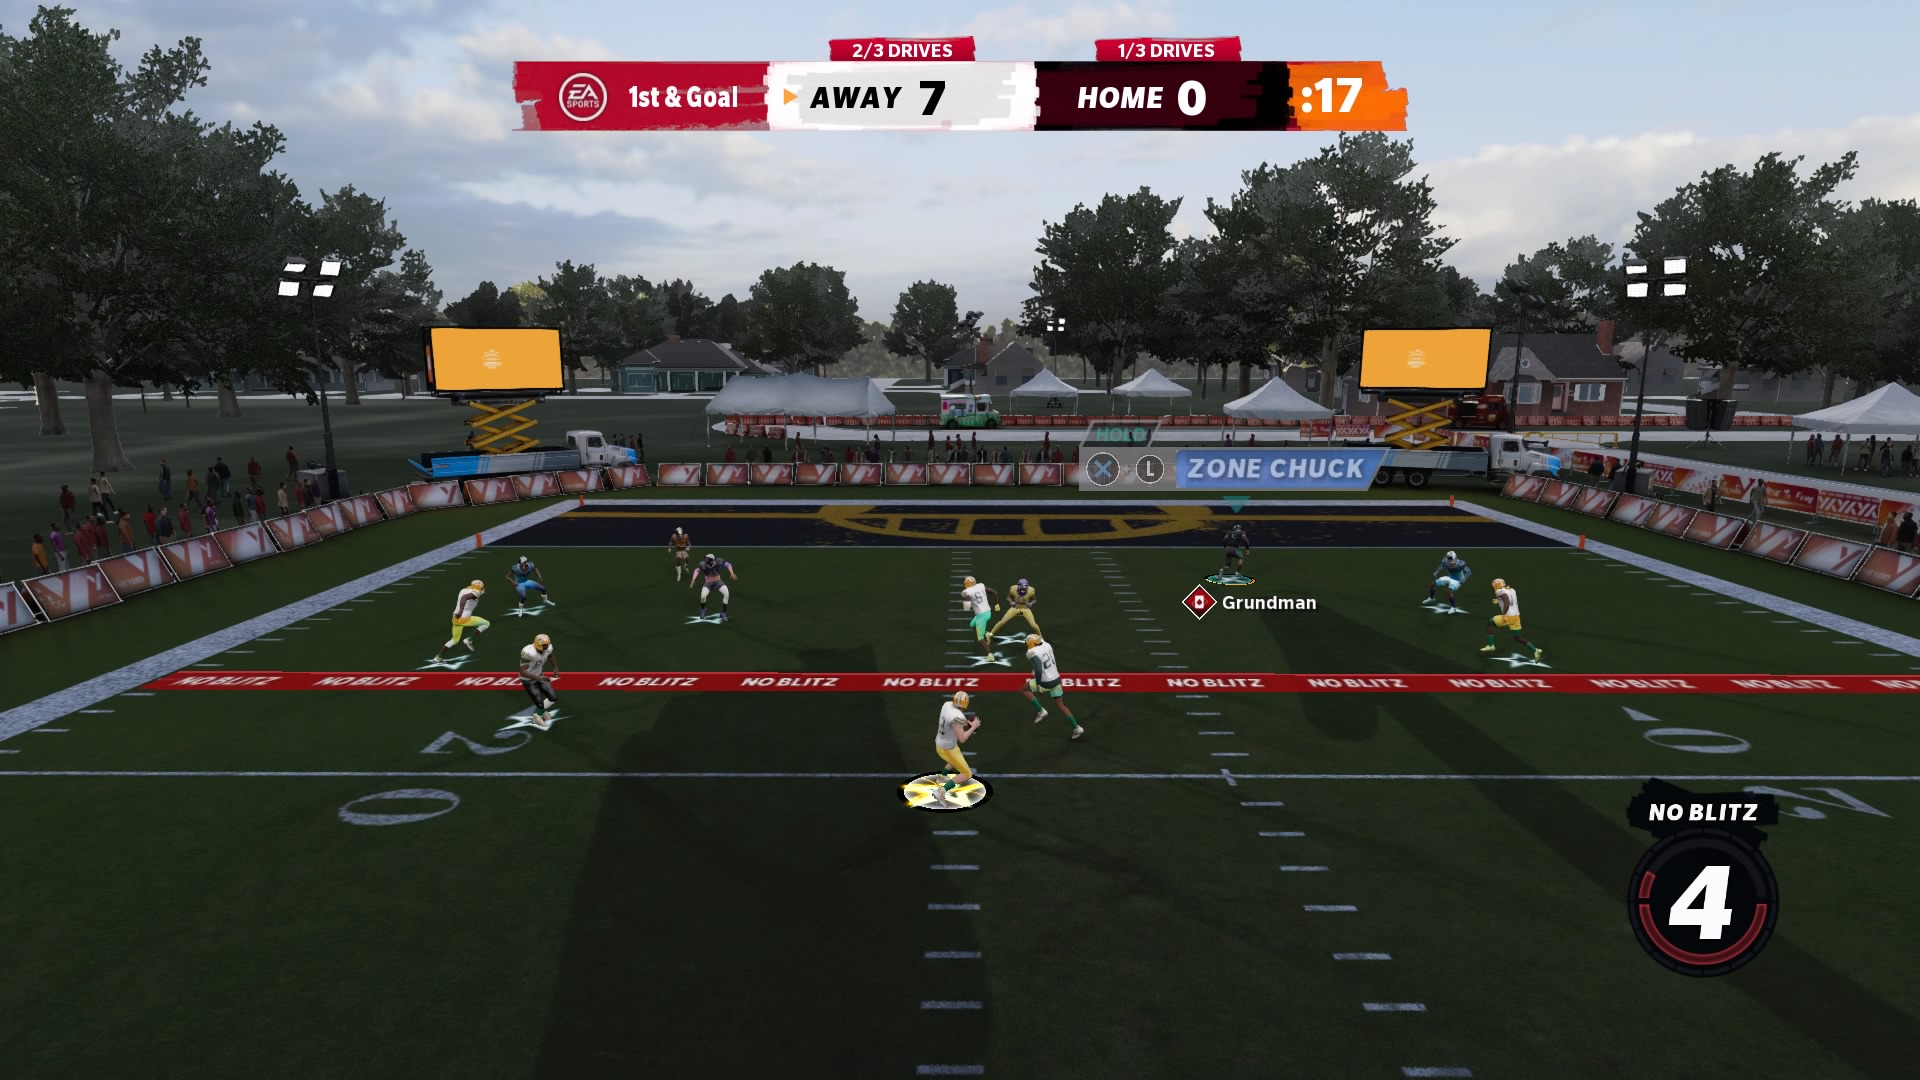 Madden NFL 21 Review